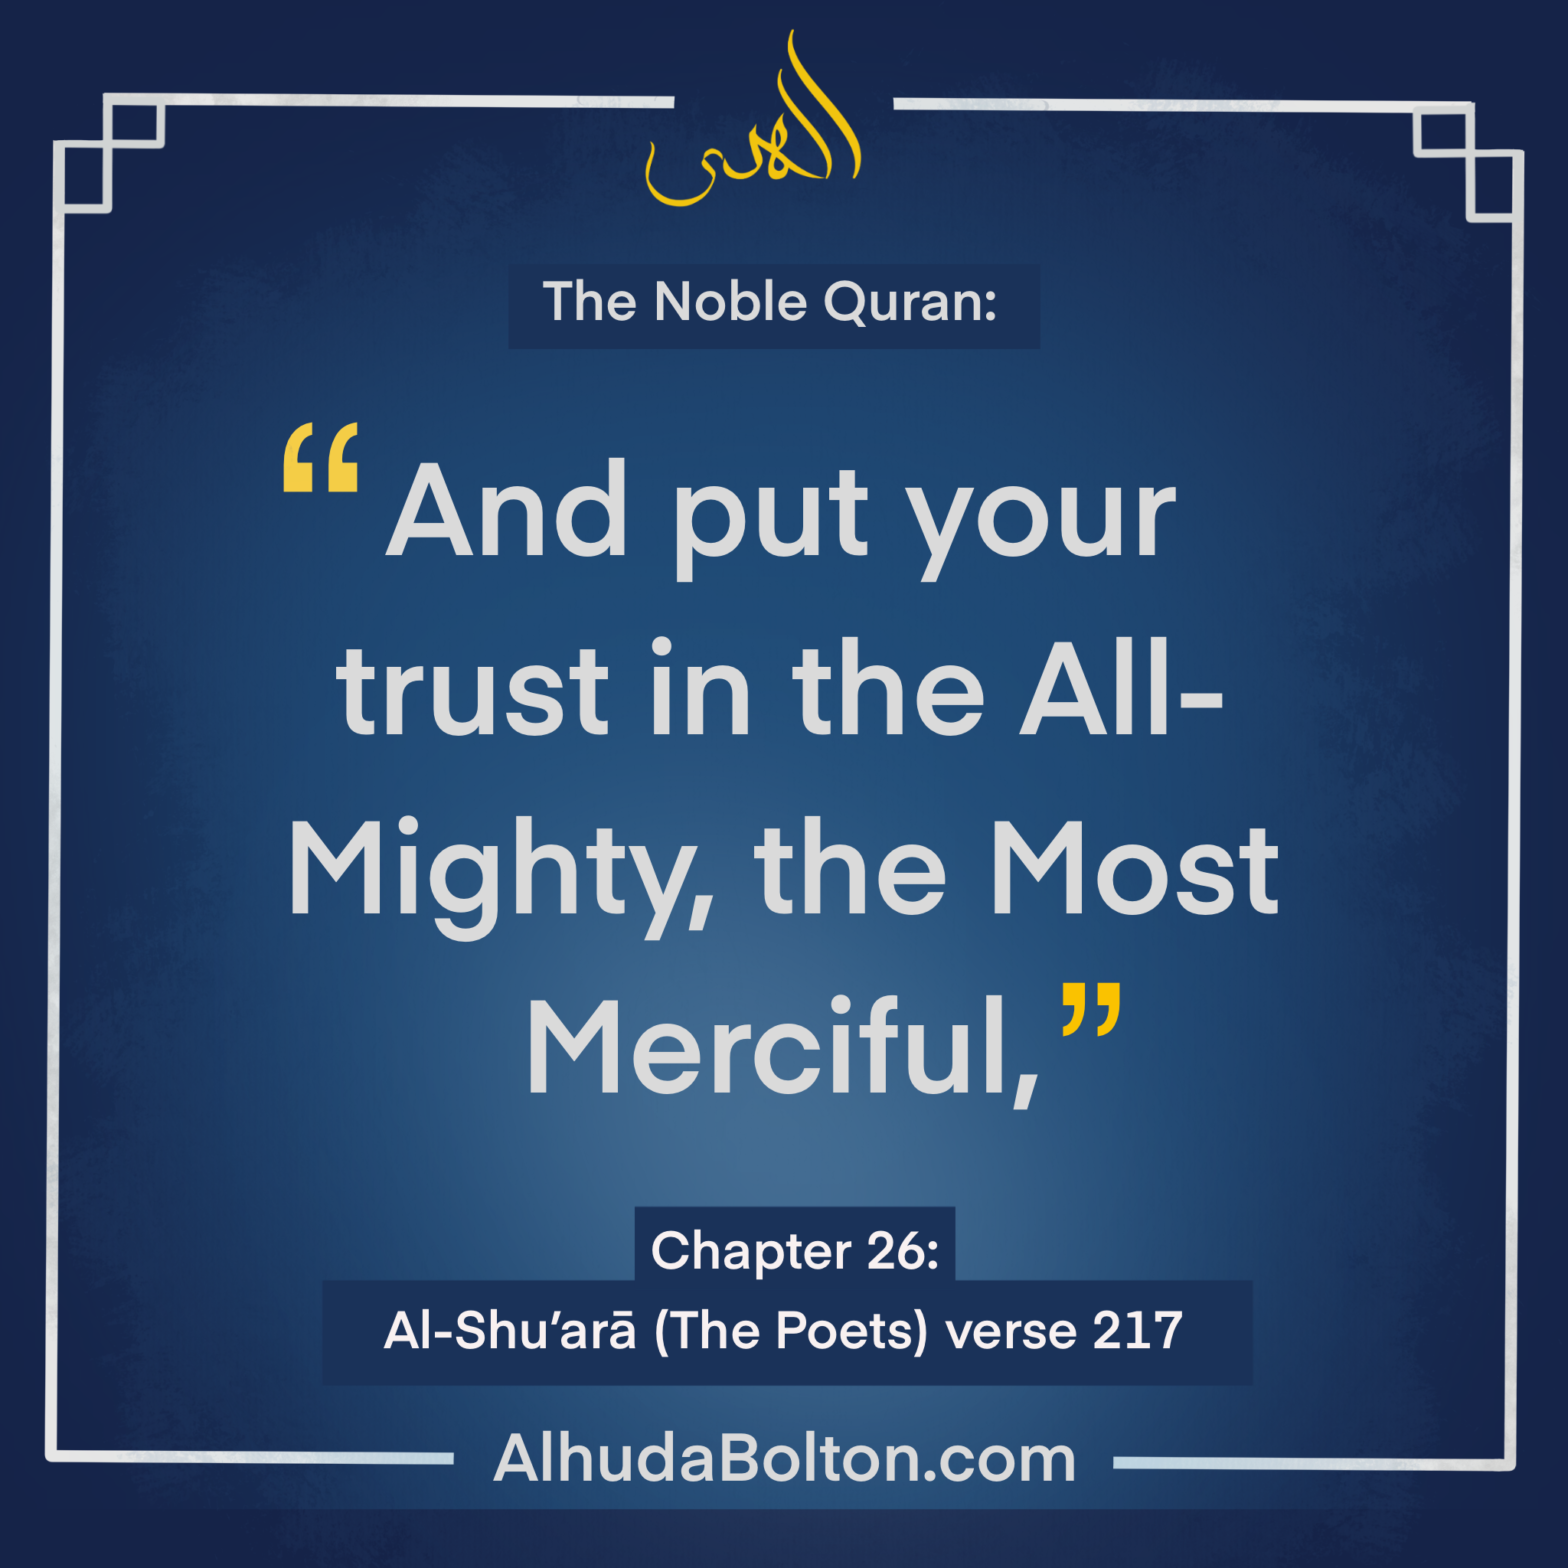 Qur’an: “And put your trust…”